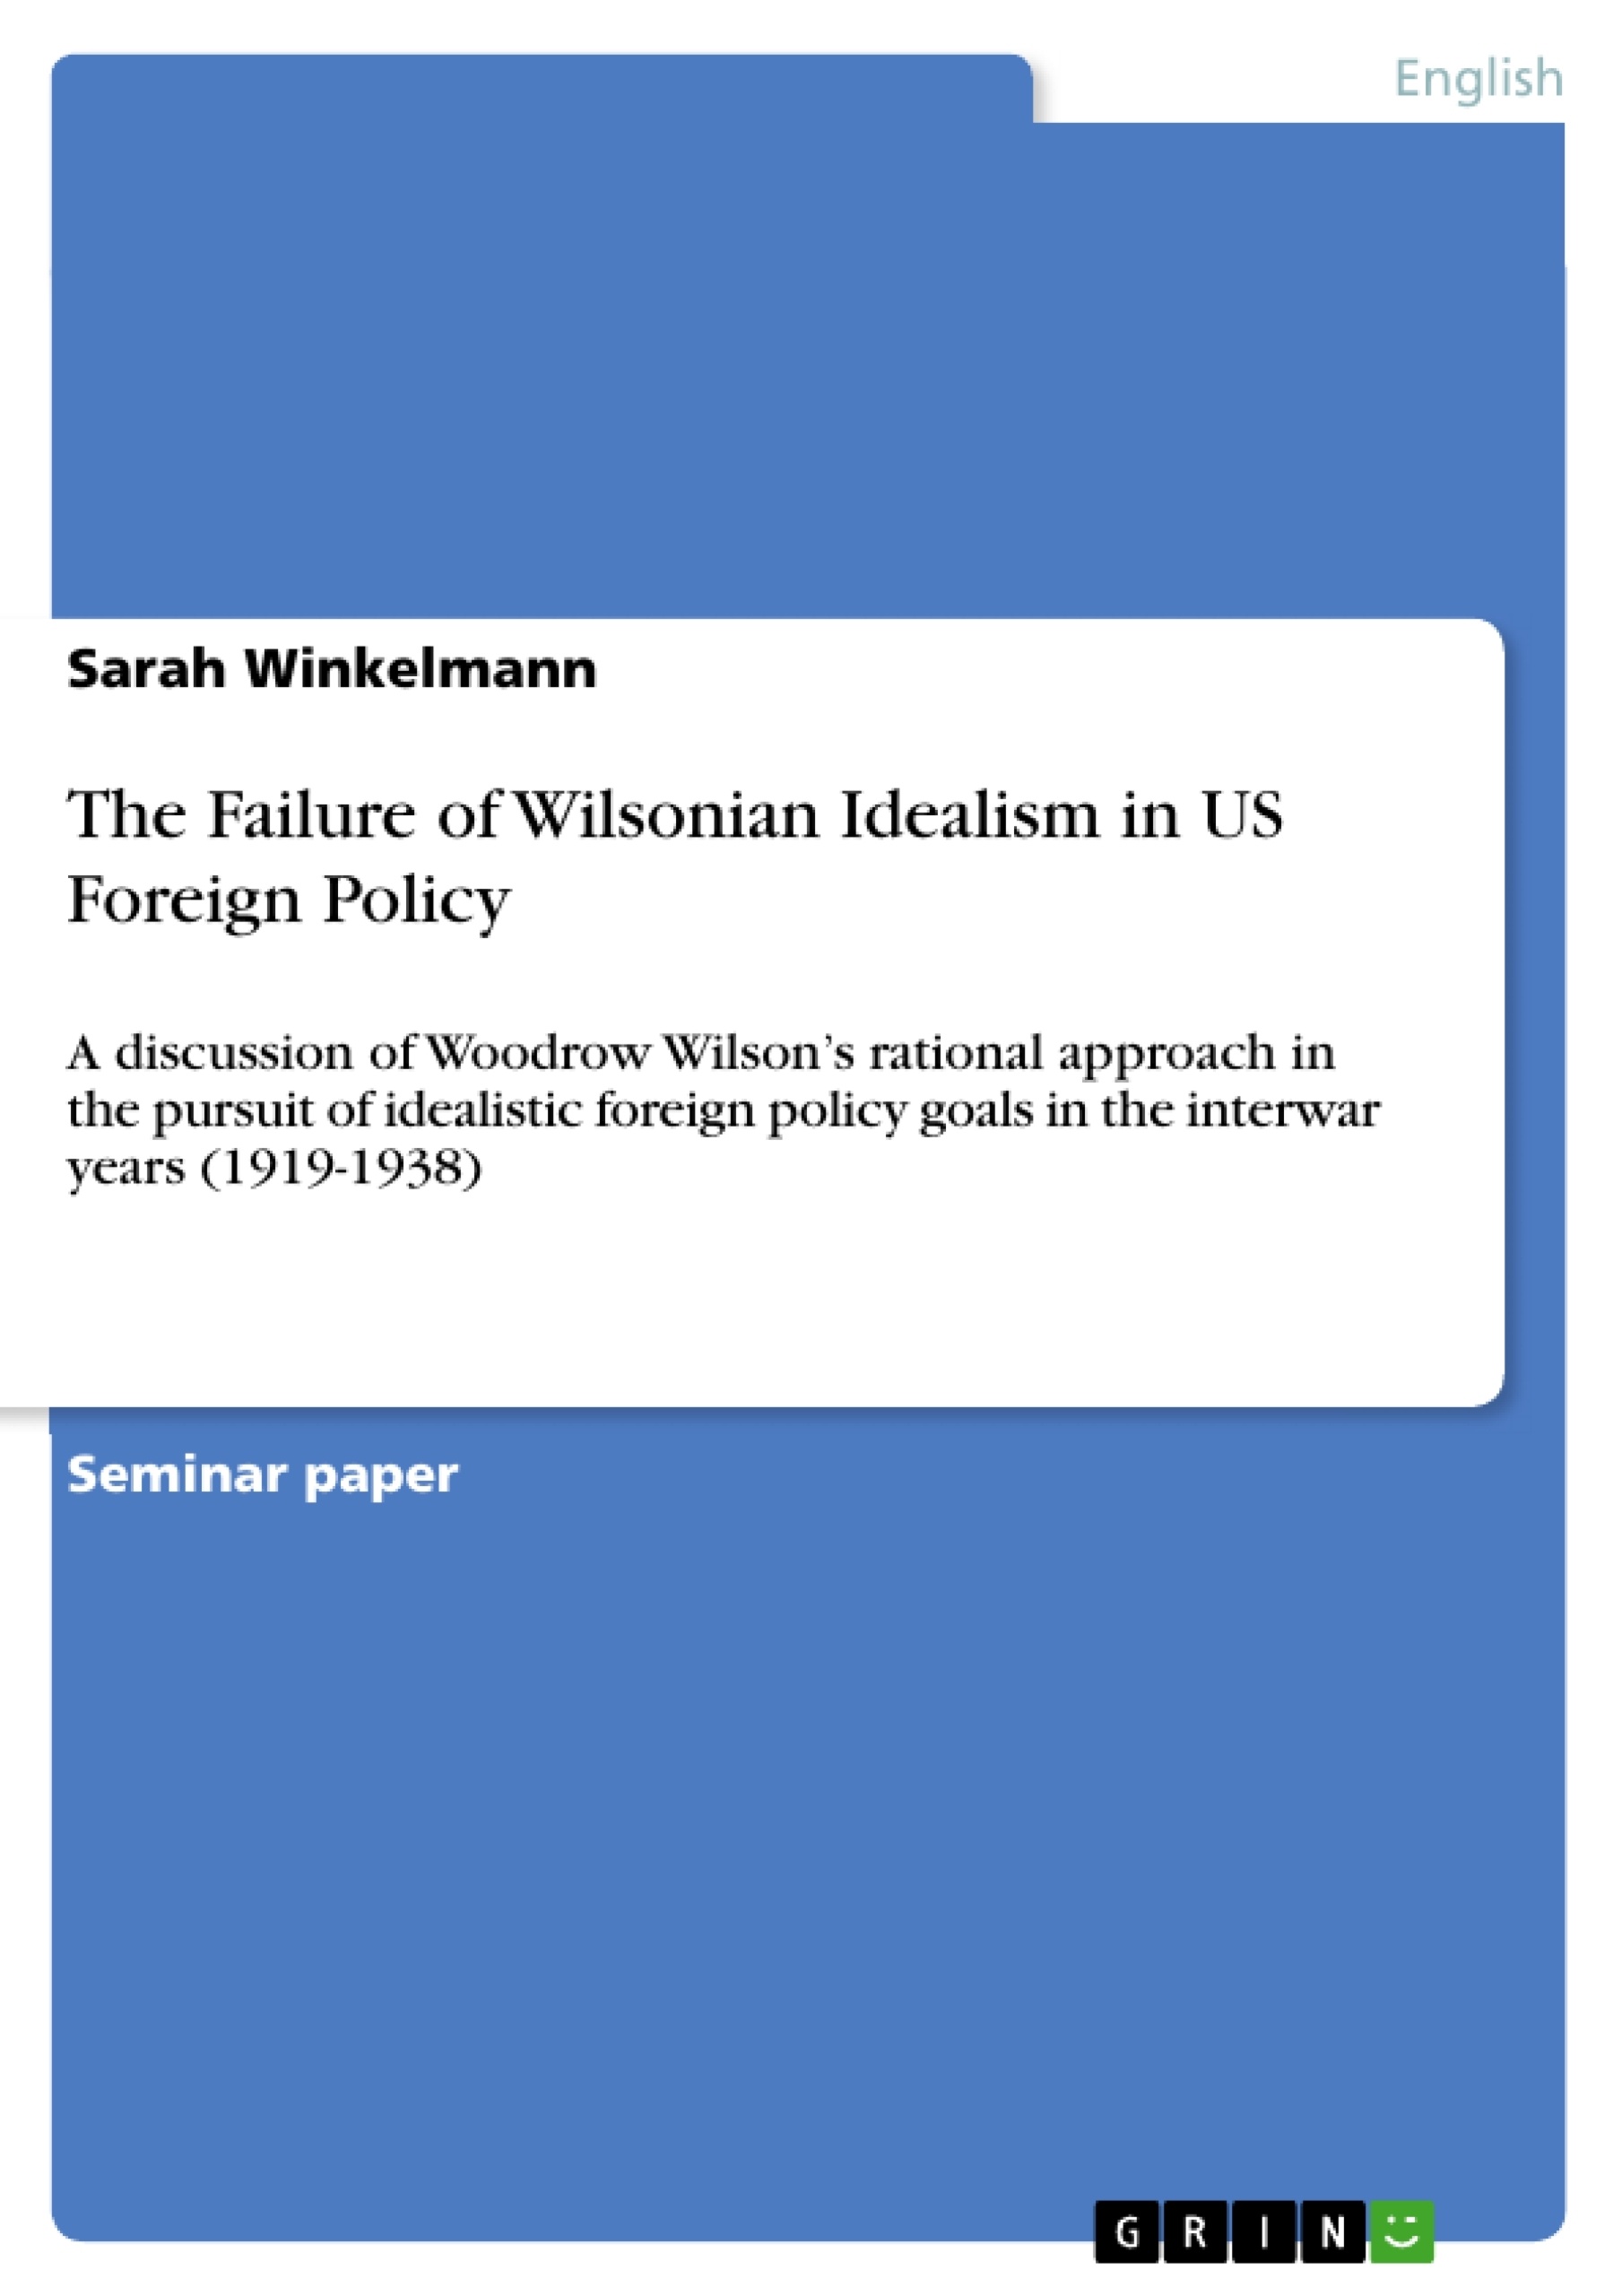 Title: The Failure of Wilsonian Idealism in US Foreign Policy